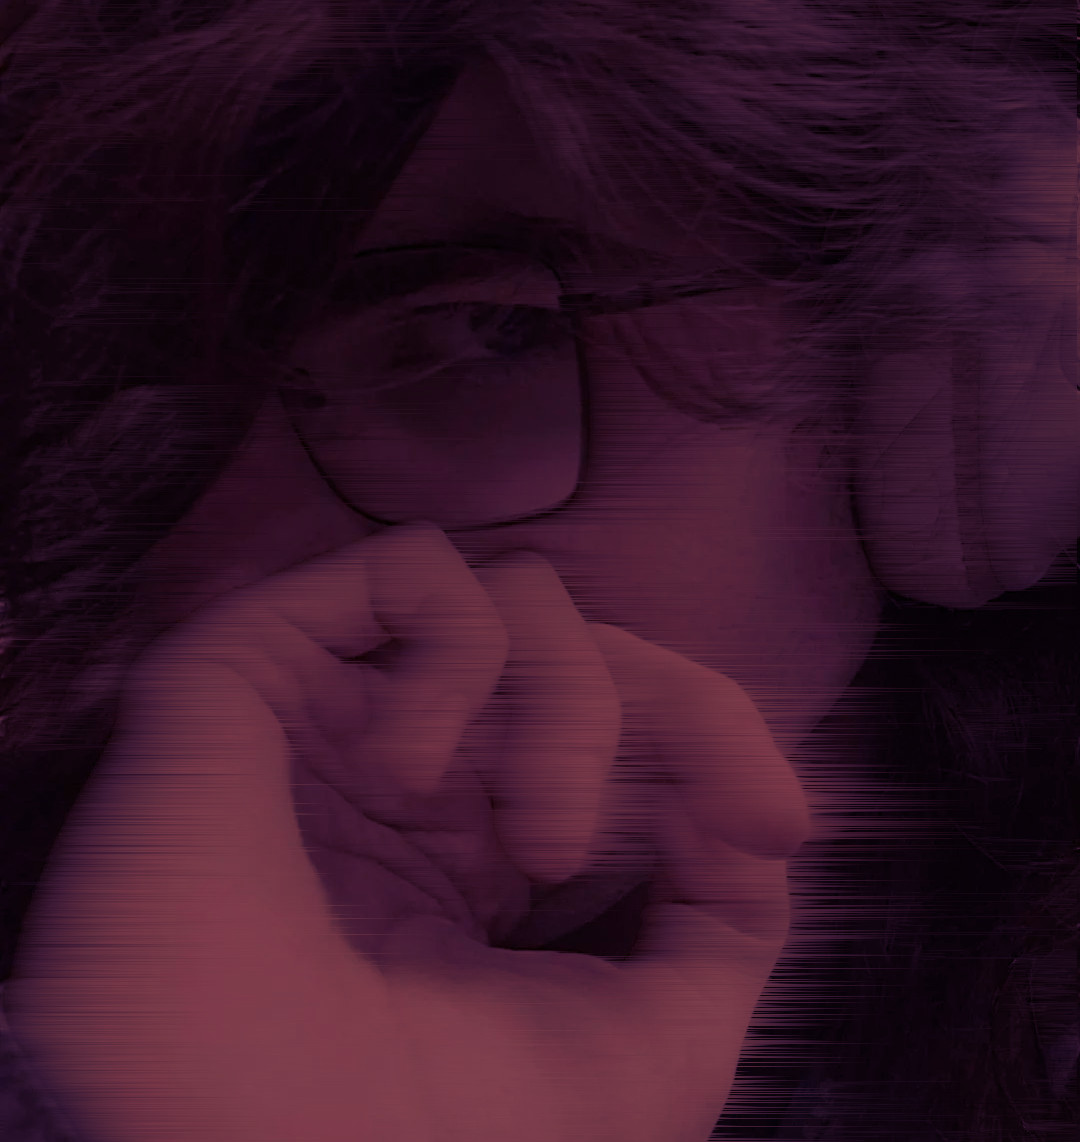 A selfie of me, hiding my mouth with my hand, with my glasses and headphones on. It's tinted in a maroon color, and has a wind effect applied to it.